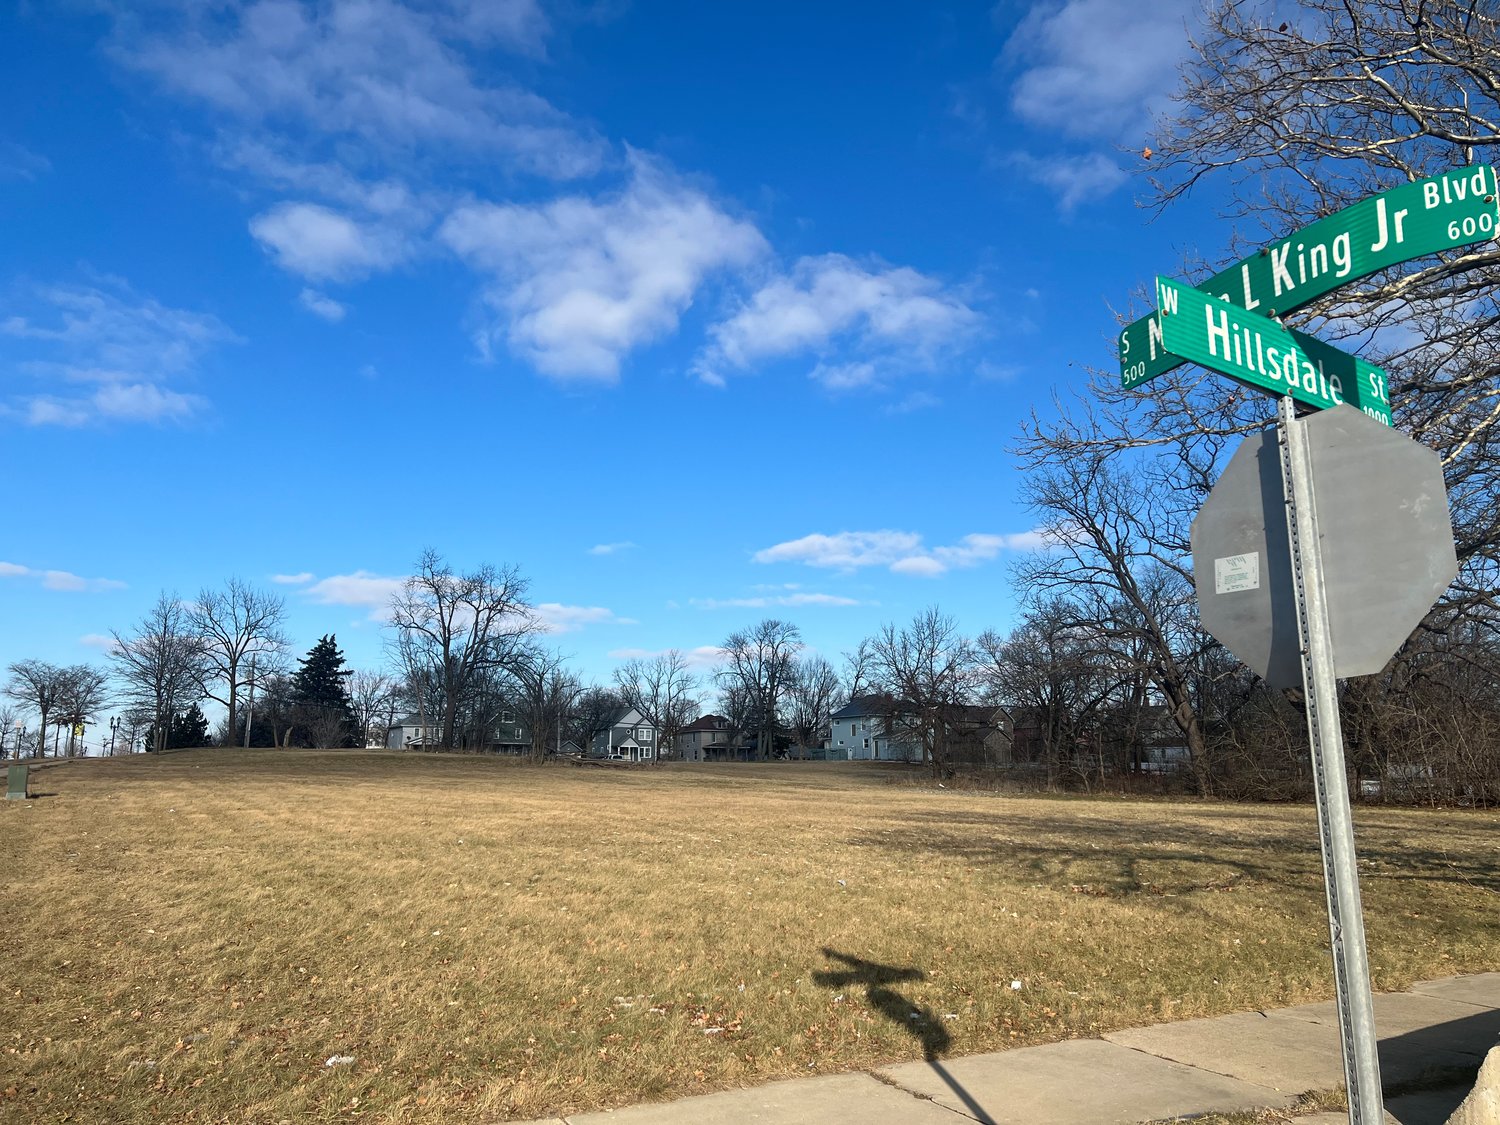 A developer plans to construct an apartment building on this vacant city-owned lot on the corner of Martin Luther King Jr. Boulevard and Hillsdale Street.